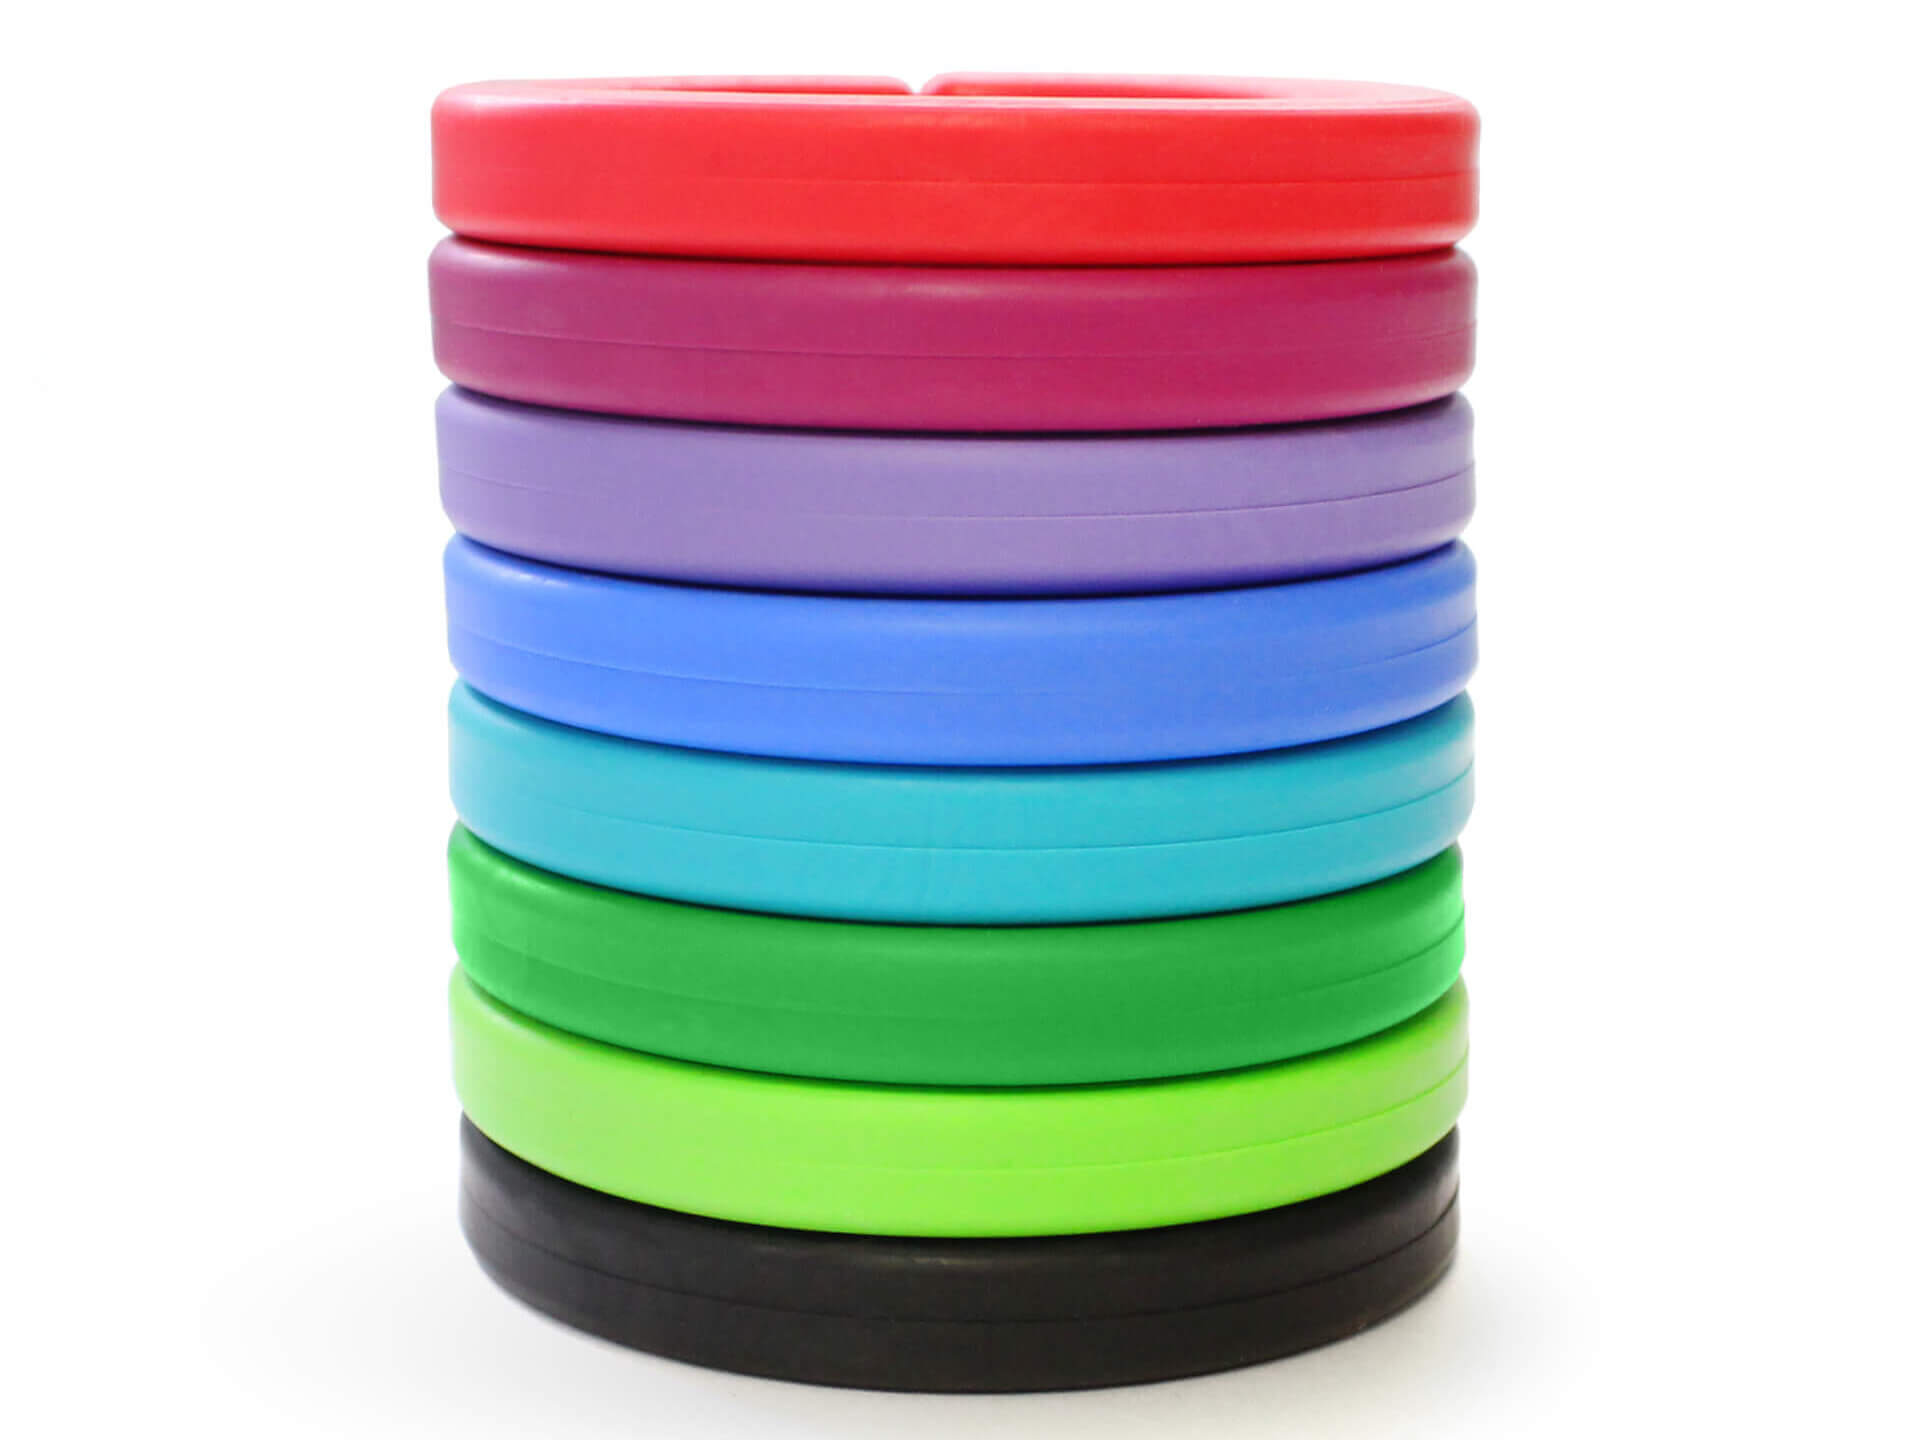 ARK chewable bangle all stack